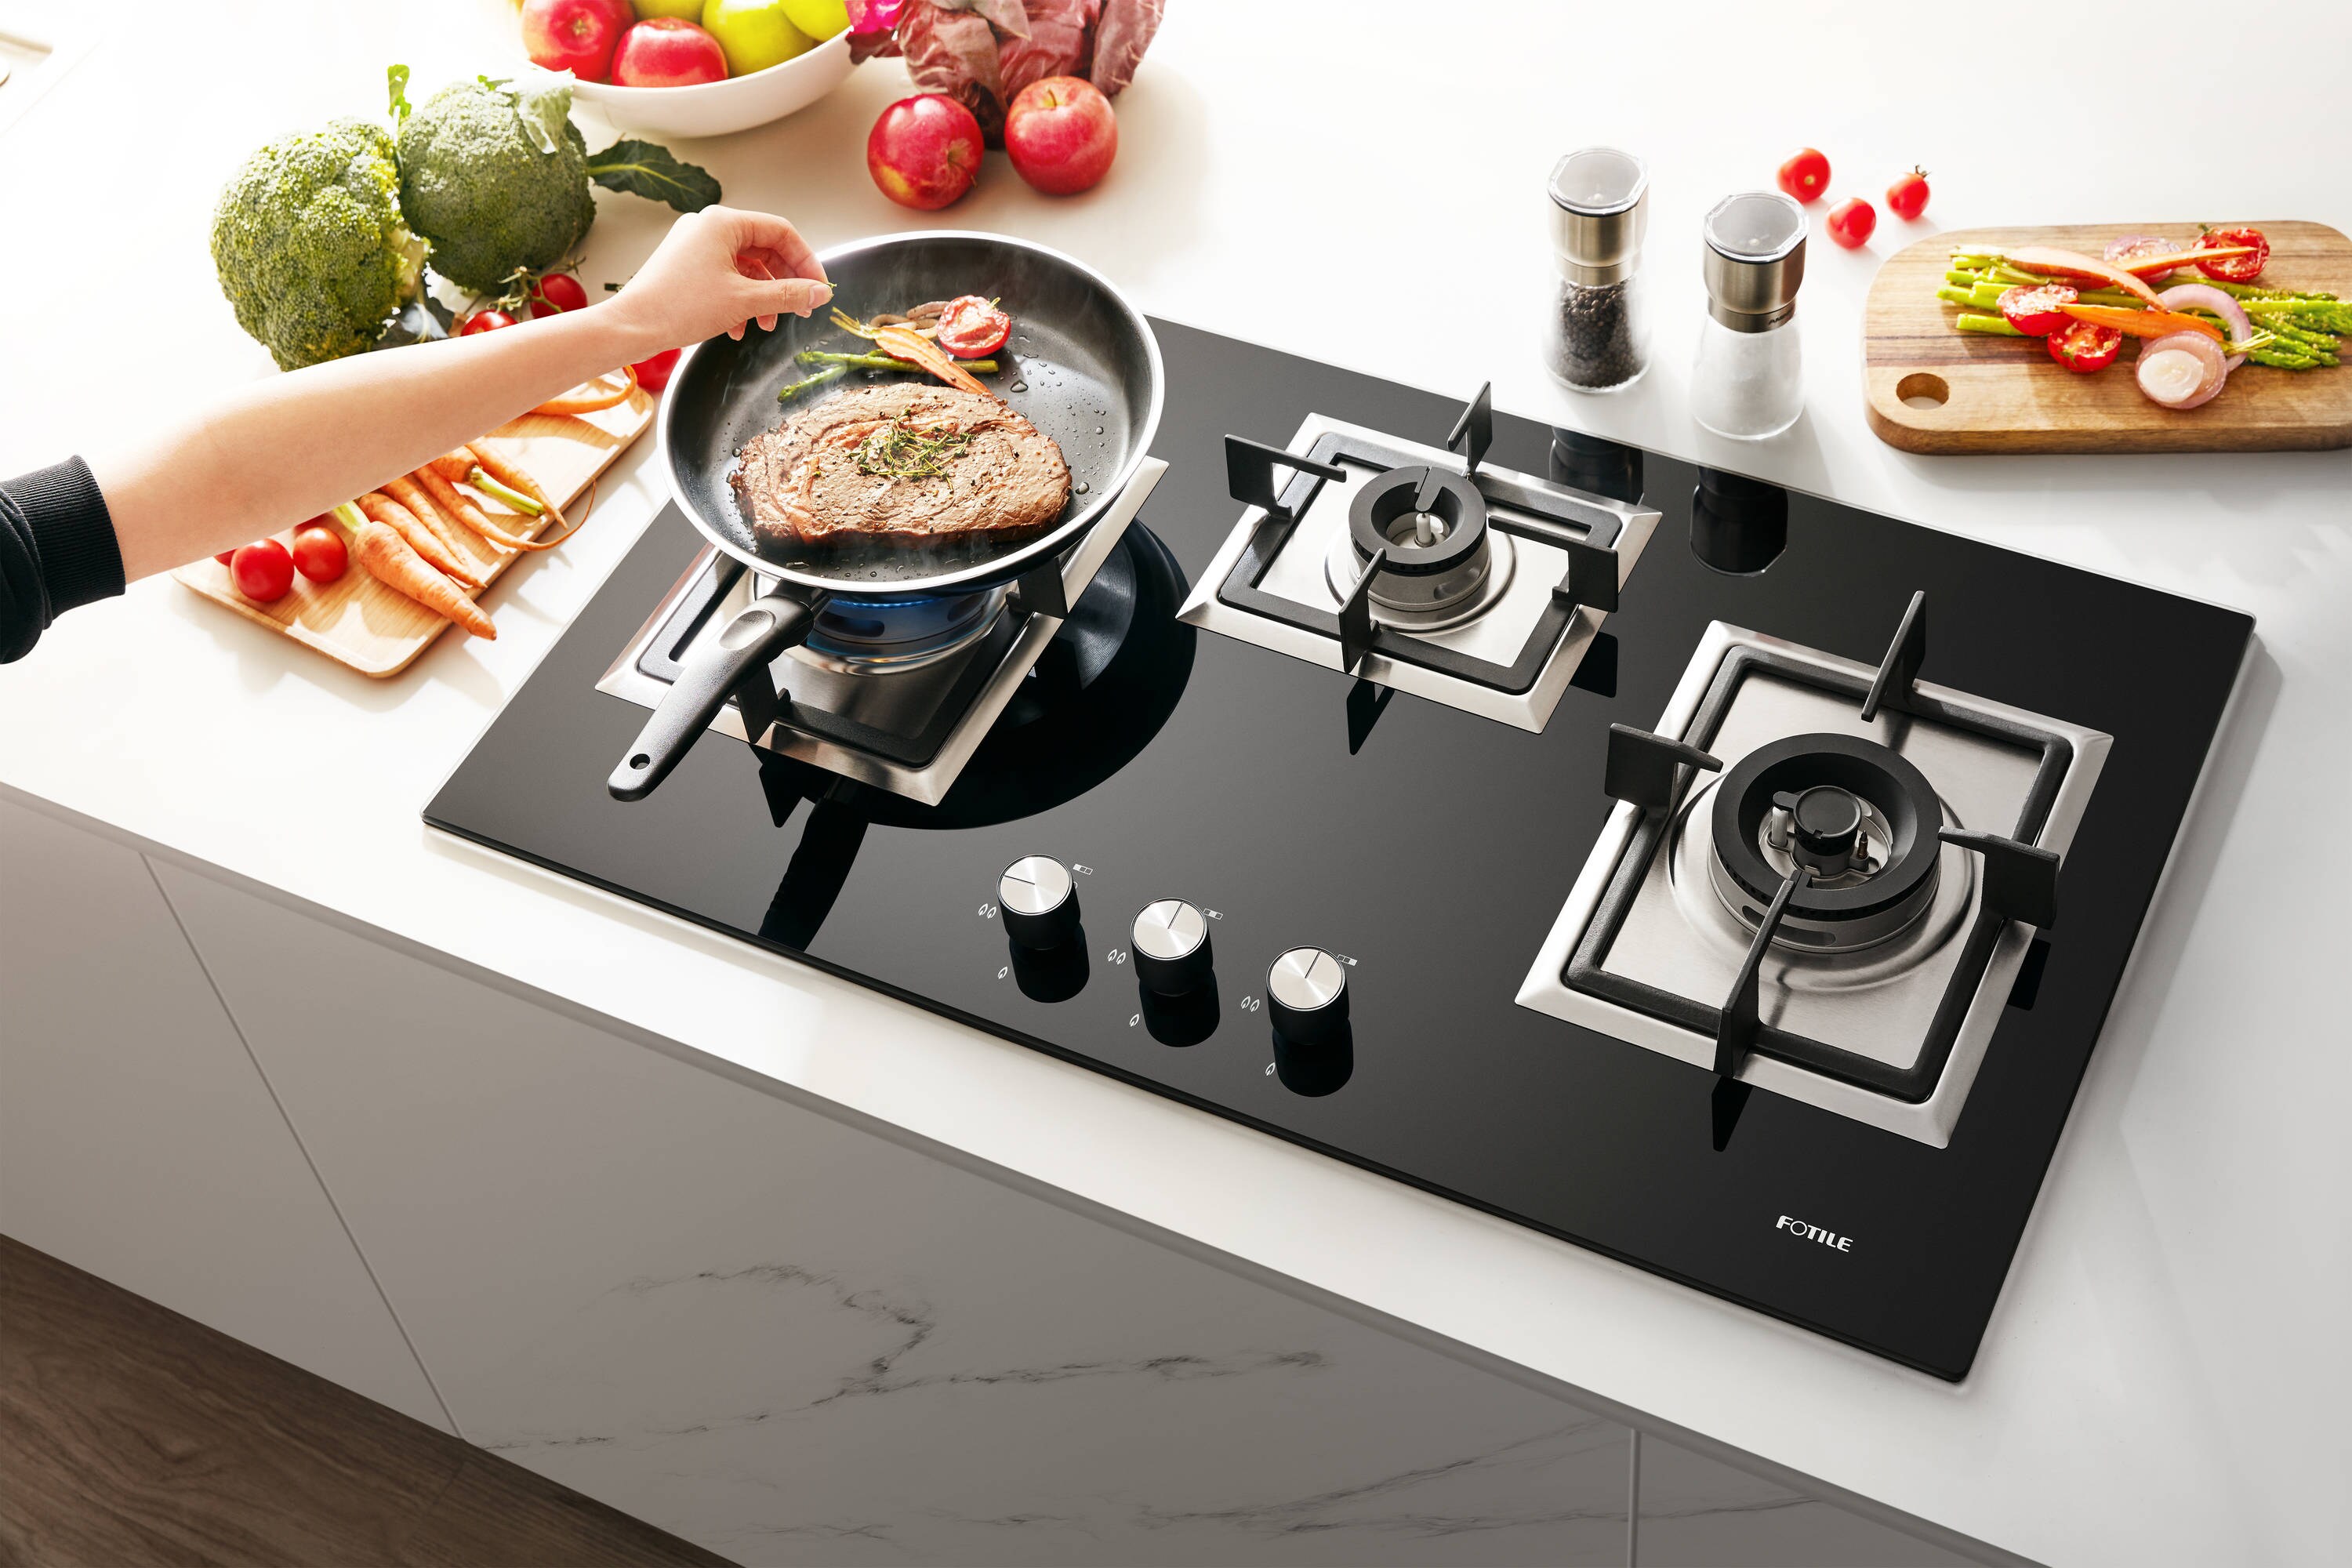 FOTILE Tri-Ring Professional Grade with 57K Total-BTU 30-in 5 Burners  Stainless Steel Gas Cooktop